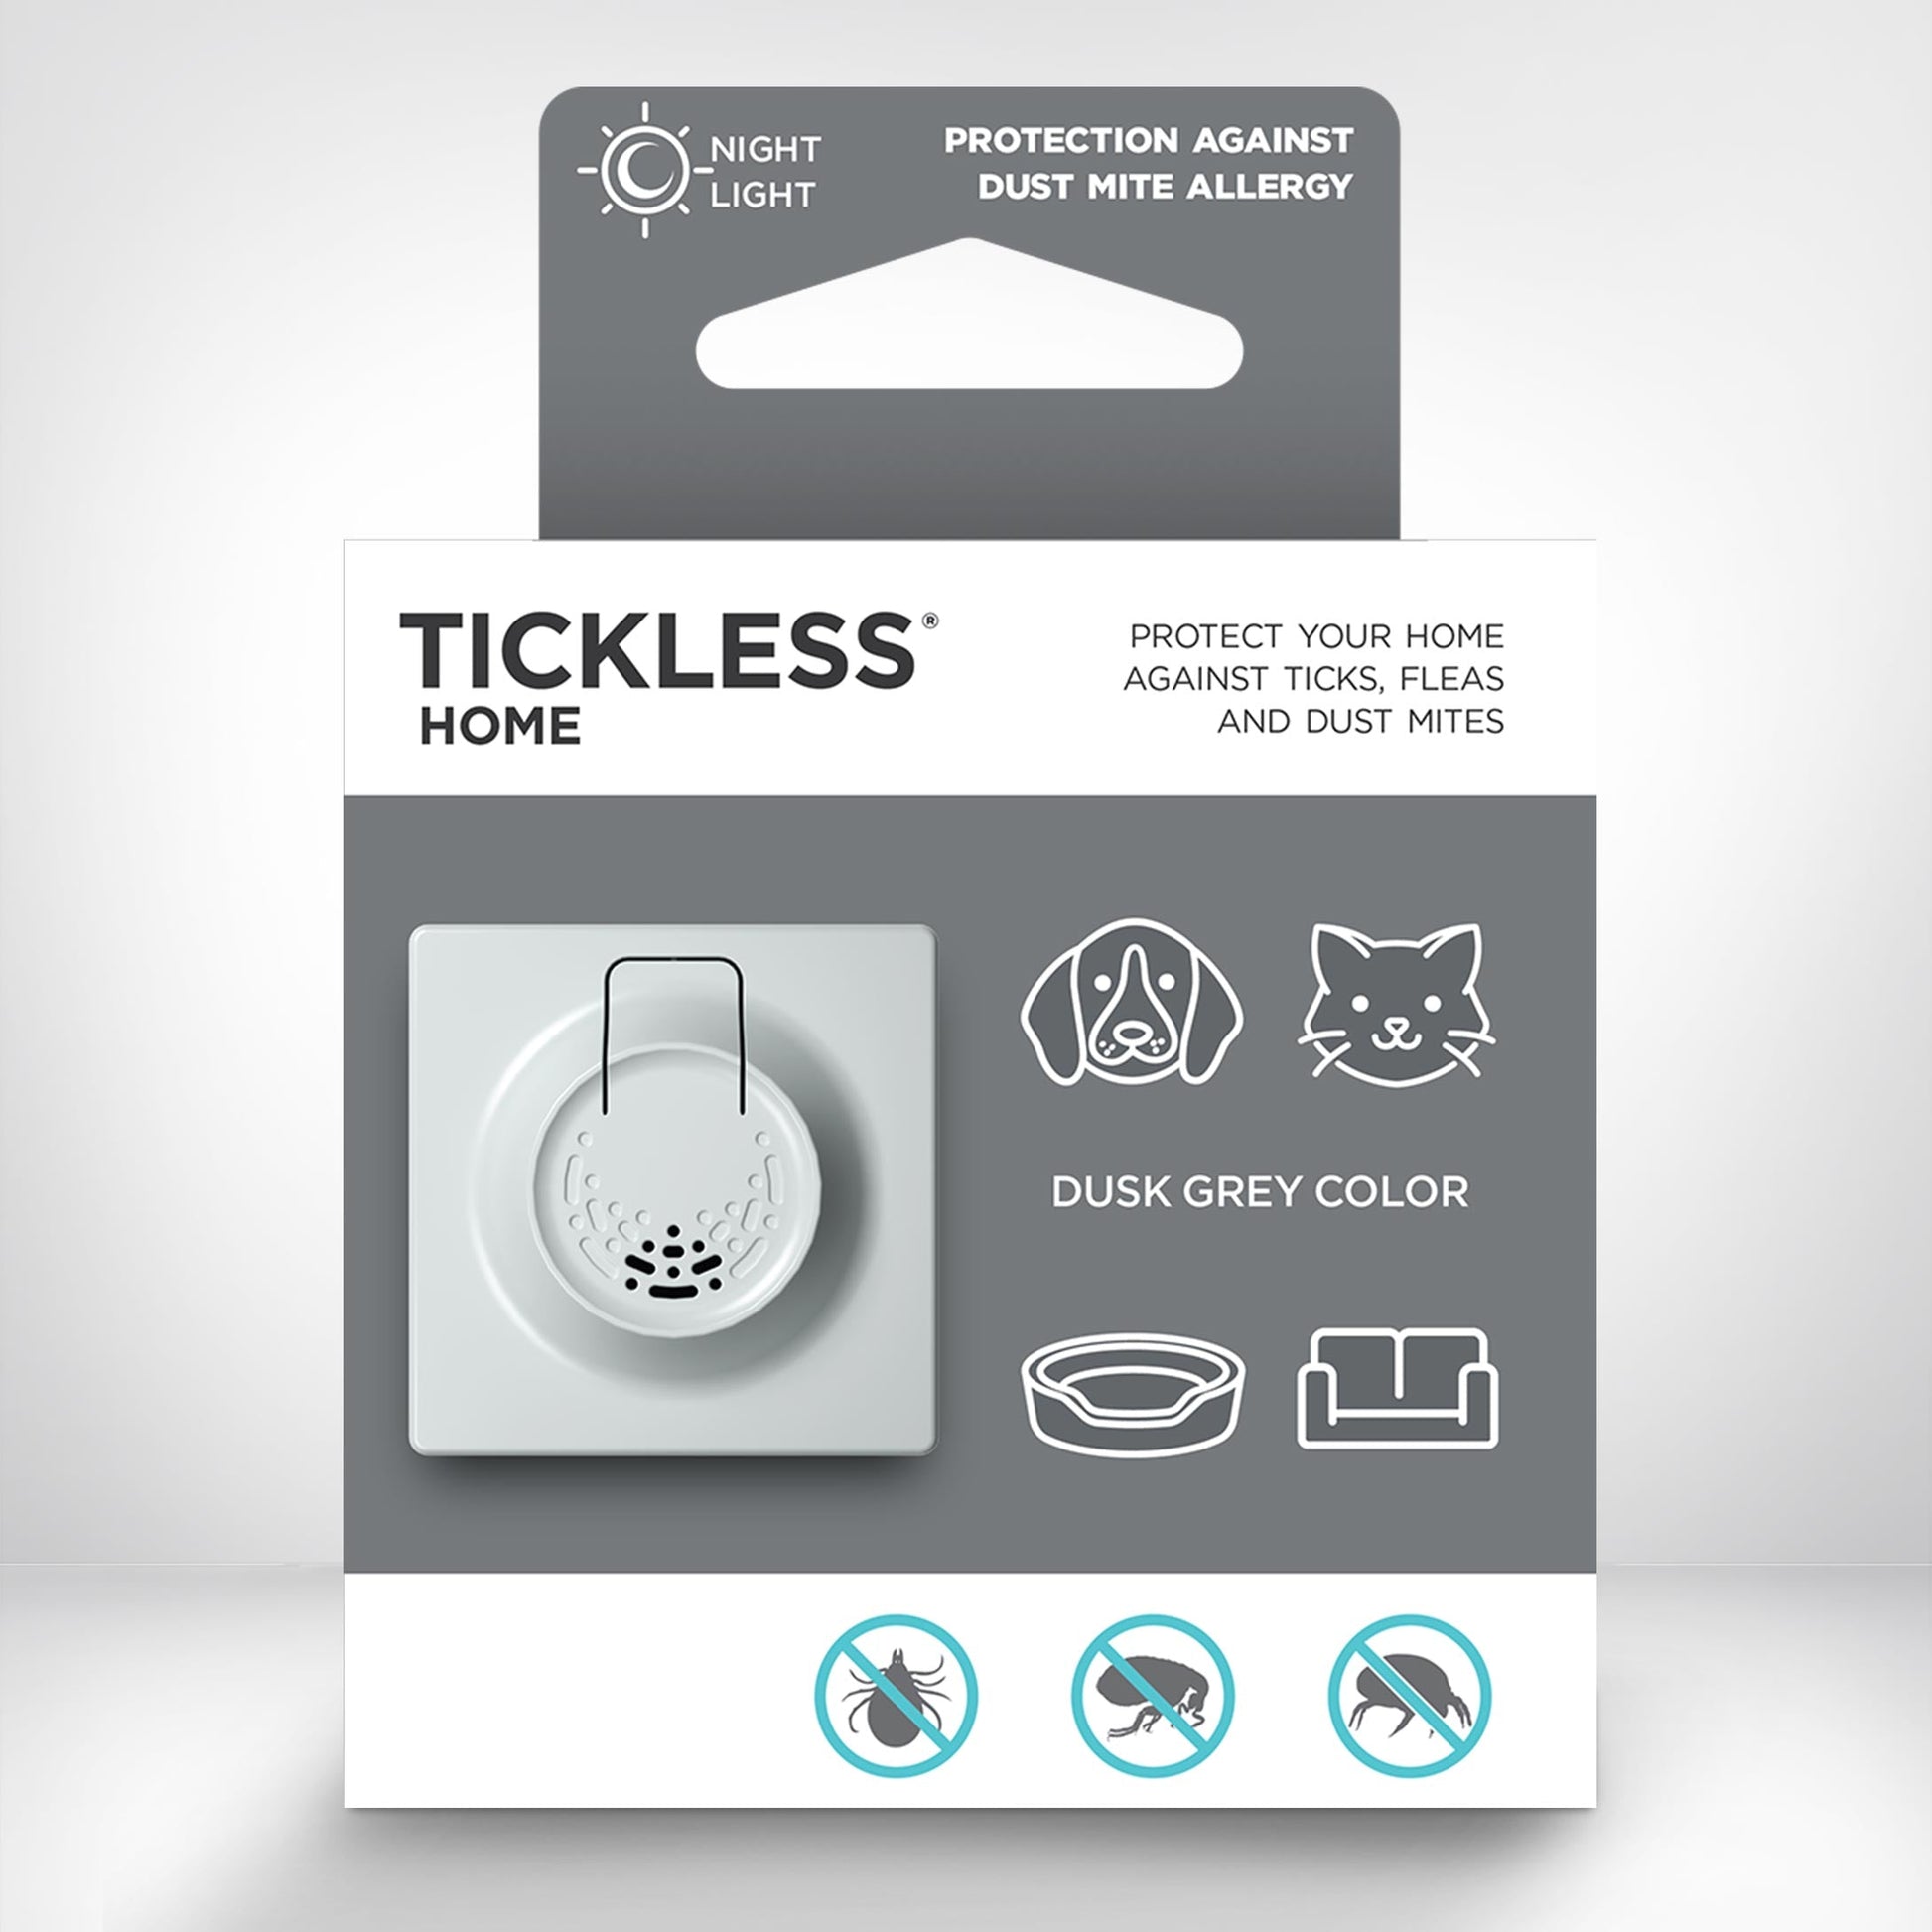 TicklessUSA Tickless Home Protection Chemical-Free Tick and Flea Repellent for Homes sonicguard SonicGuard sonicguardusa SonicGuardUSA tick repeller ultrasonic Tickless TicklessUSA tick and flea repellent safe